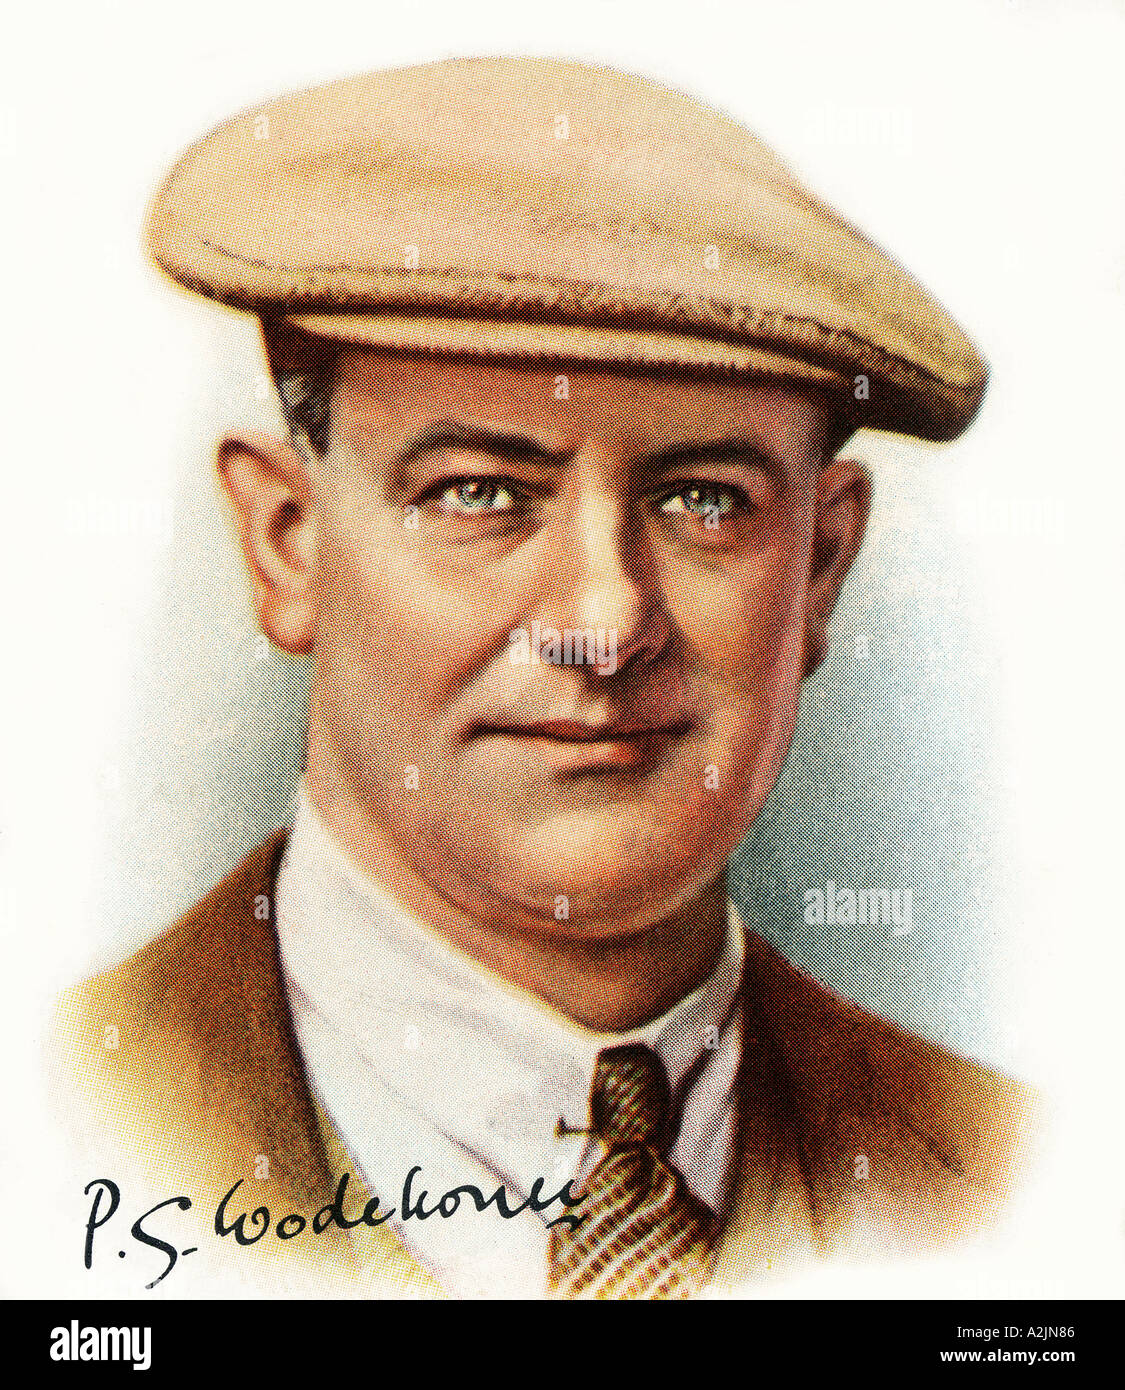 P G WODEHOUSE US humorous author born in England 1881 1975 on a 1930s cigarette card with his signature Stock Photo